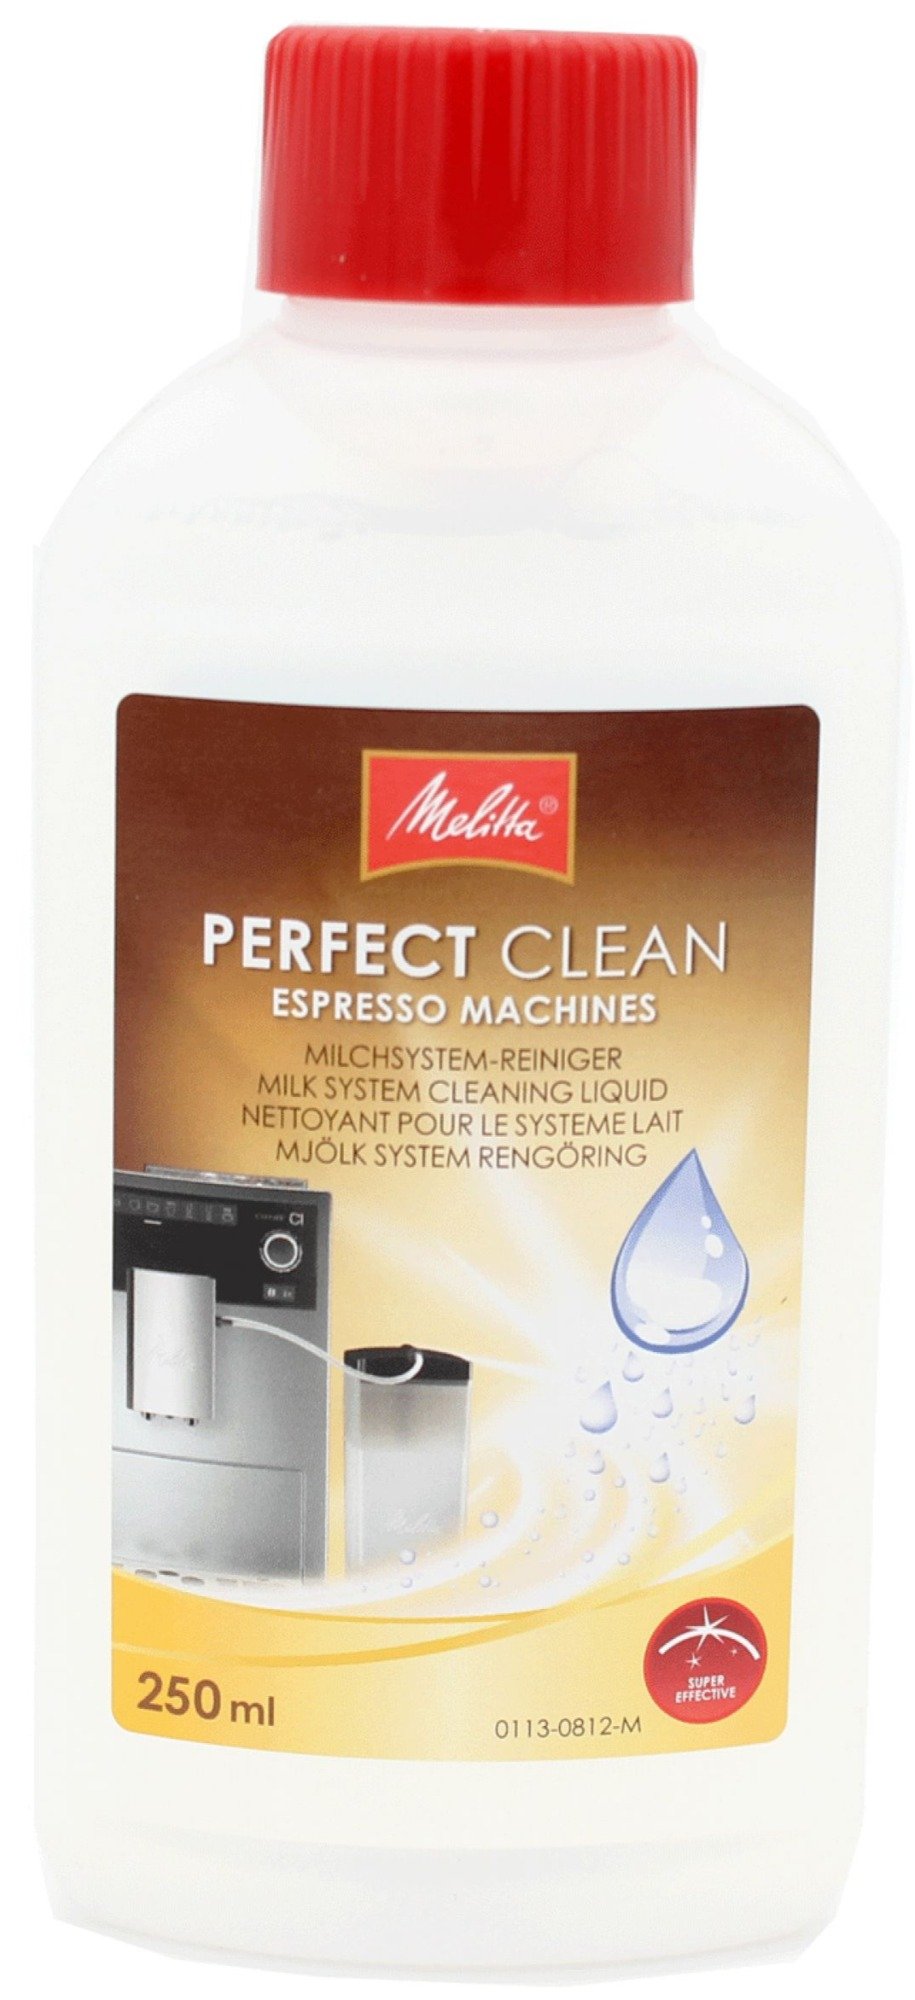 Melitta Perfect Clean Cleaning Tablets (4 pcs) 